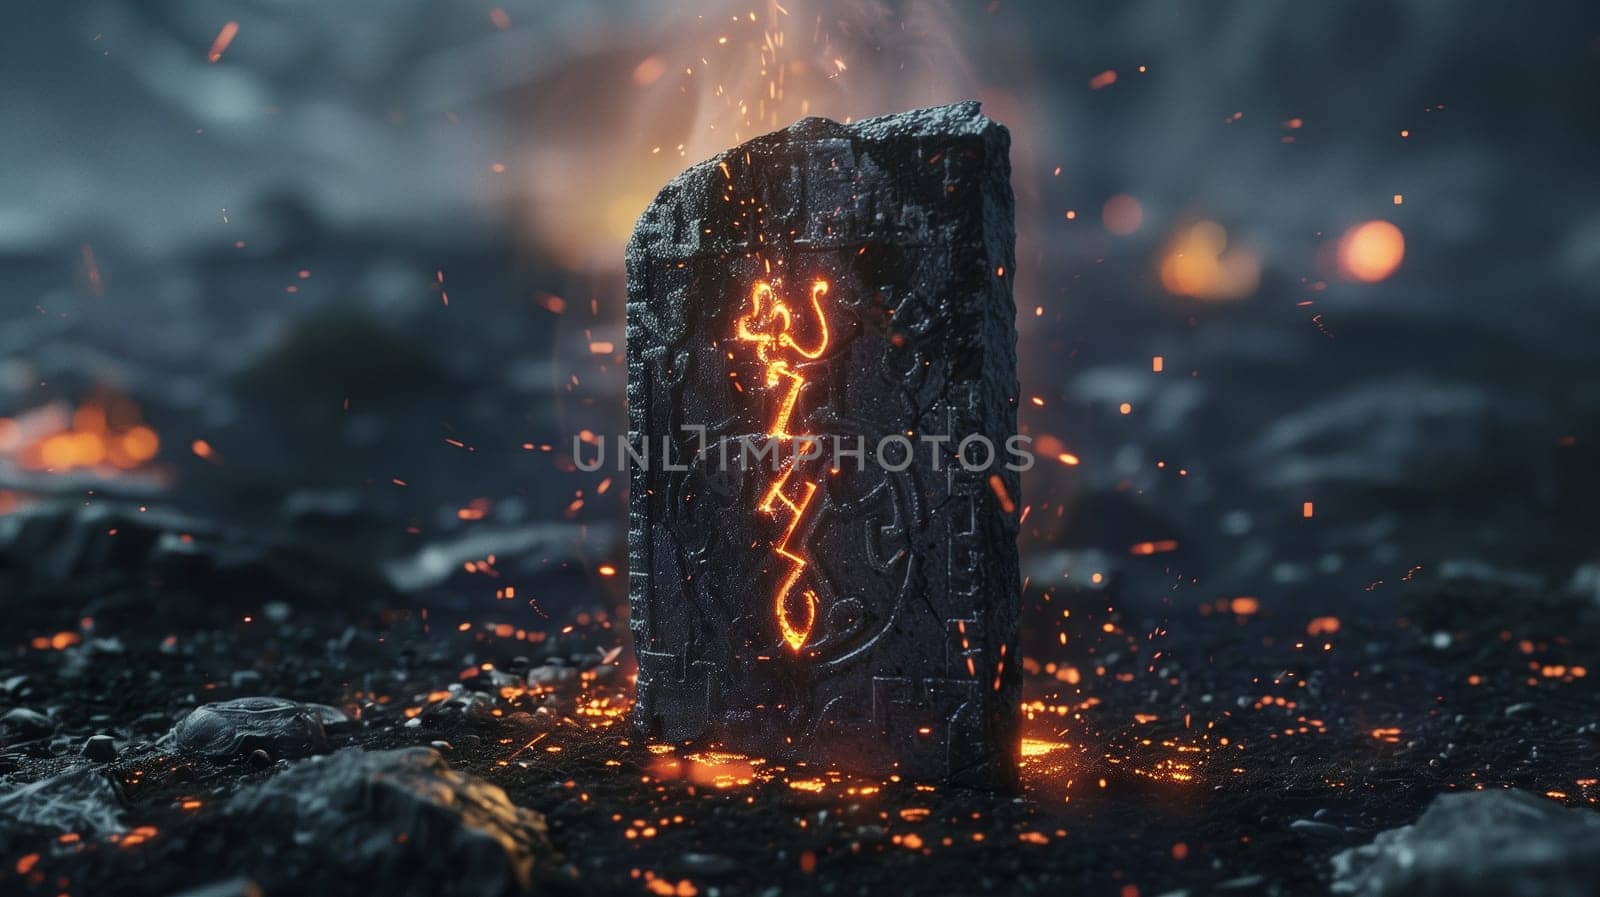 Cinematic dark photo of a mysterious stone with mystical fire symbols